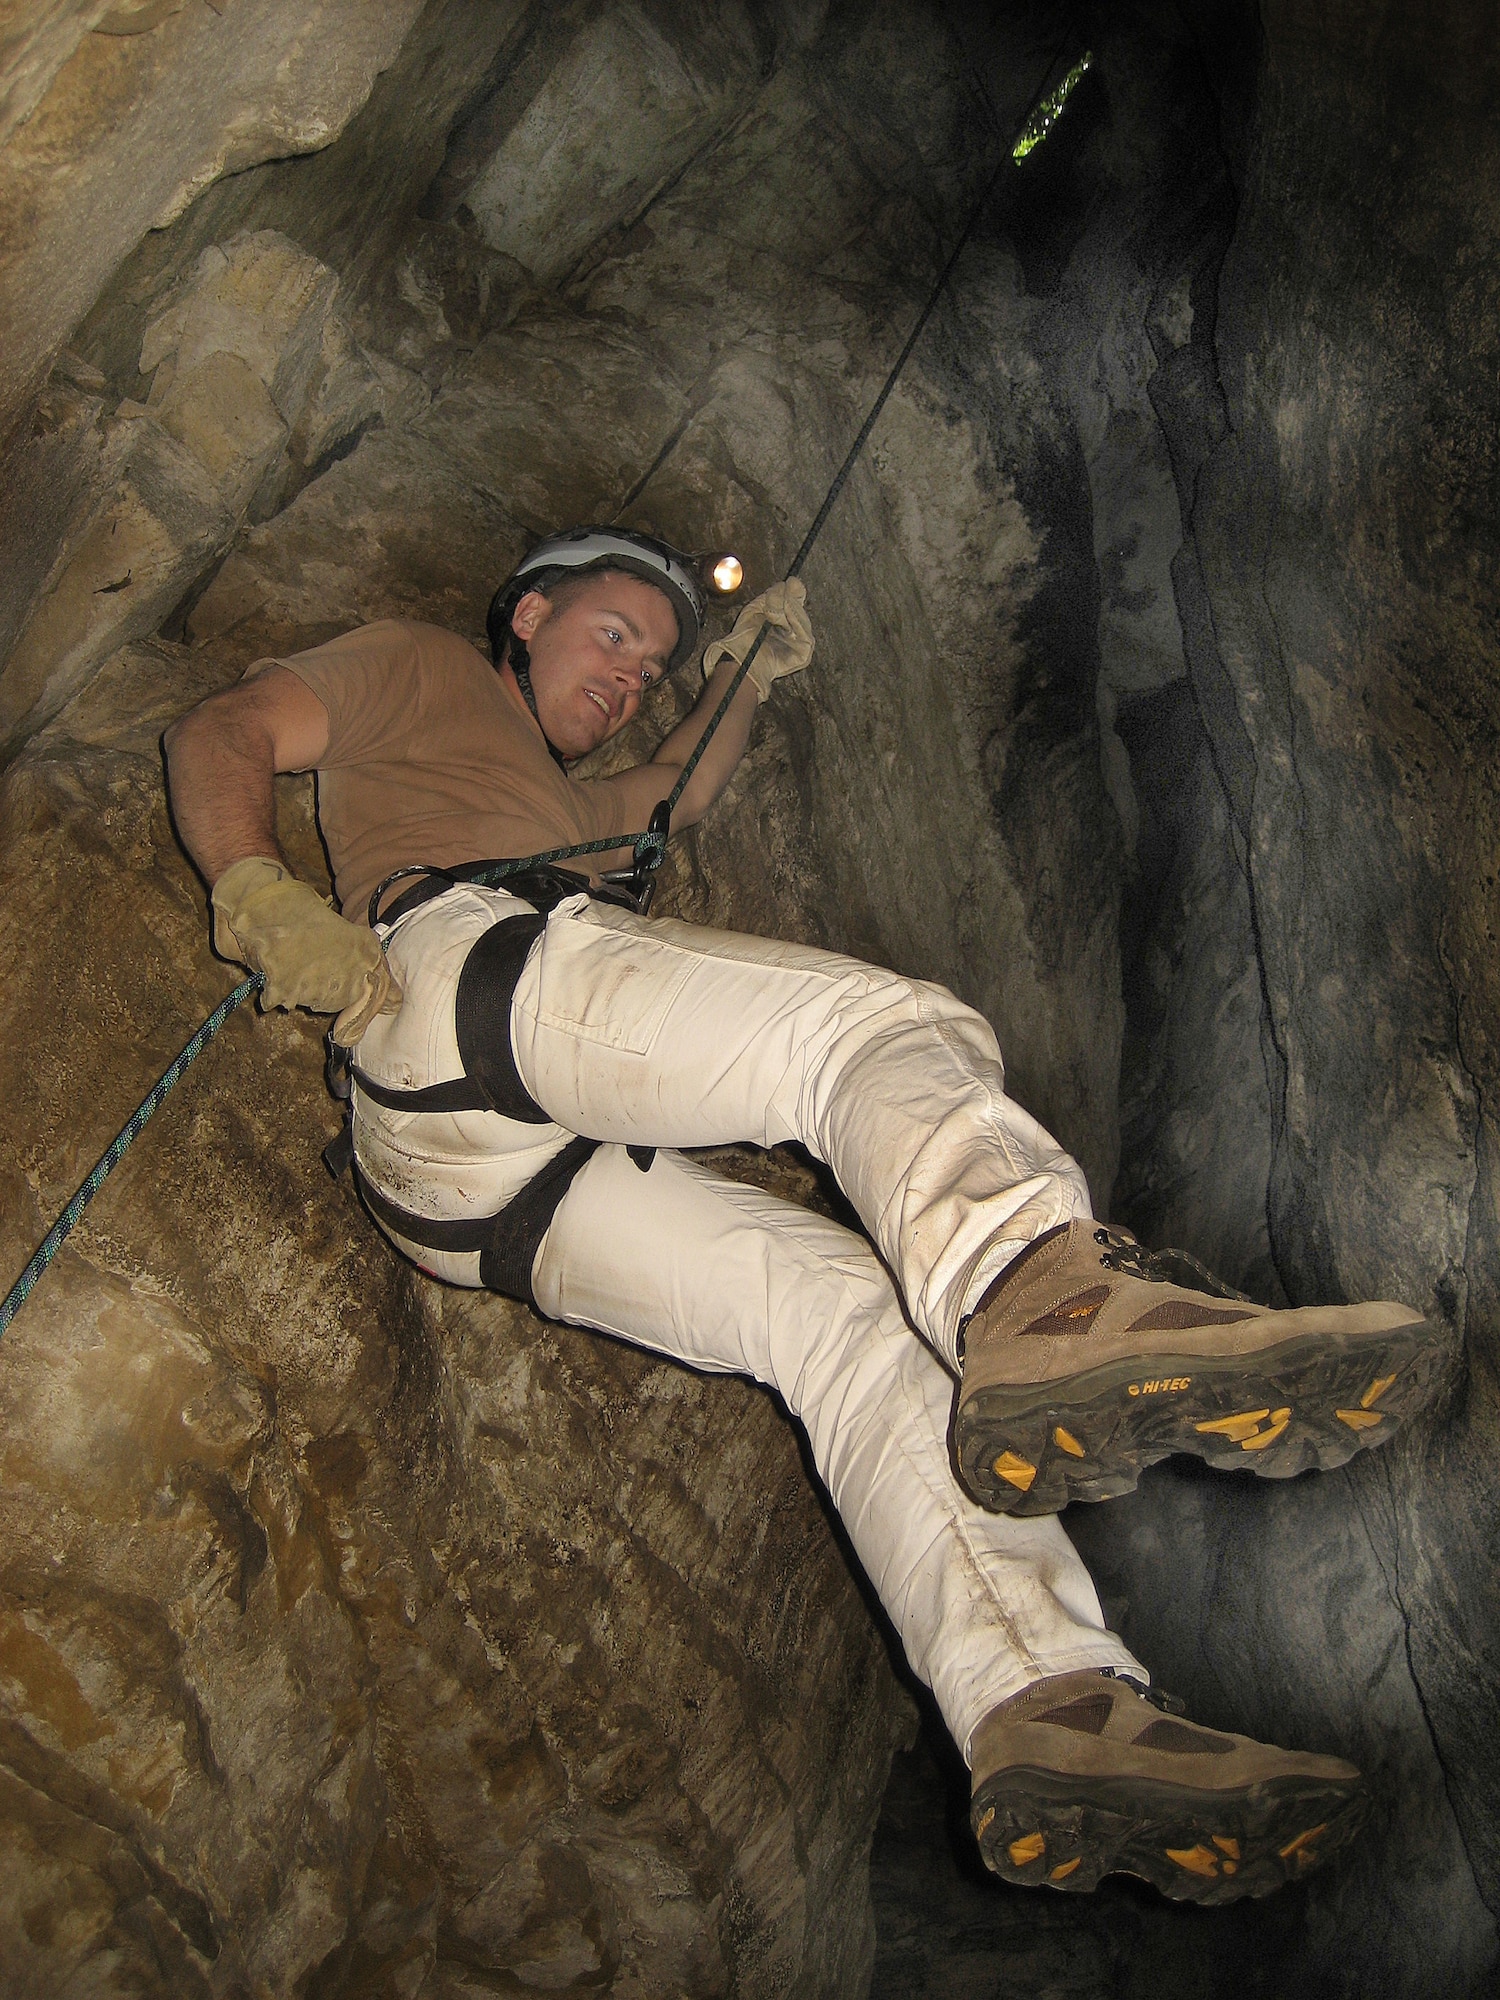 SPANGDAHELM AIR BASE, Germany -- Capt. Jared Ferneau, 52nd Fighter Wing Plans and Programs, rappels into a cave during an Outdoor Recreation daytrip. Capt. Ferneau was one of approximately 25 Sabers who ventured to Luxembourg to crawl through and descend into caves, which were dark enough to require a hardhat light. Upcoming Outdoor Recreation caving and rappelling trips are scheduled for Aug. 9 and Sept. 12. (U.S. Air Force photo by 1st Lt. Kathleen Polesnak)